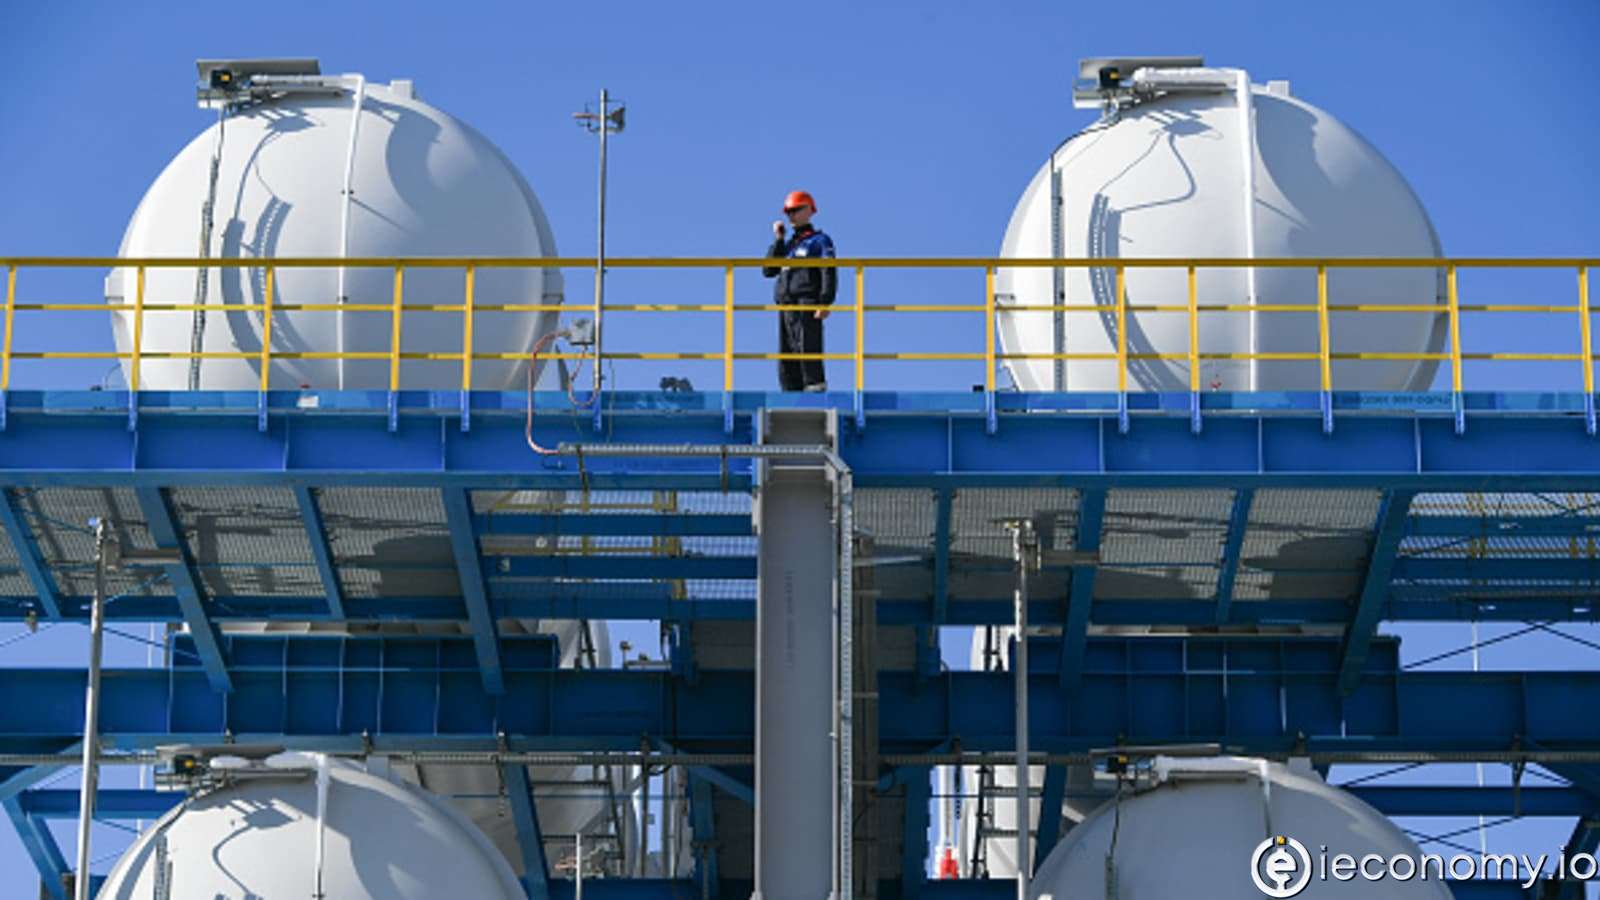 Poland claims that Gazprom sends less gas than agreed in November